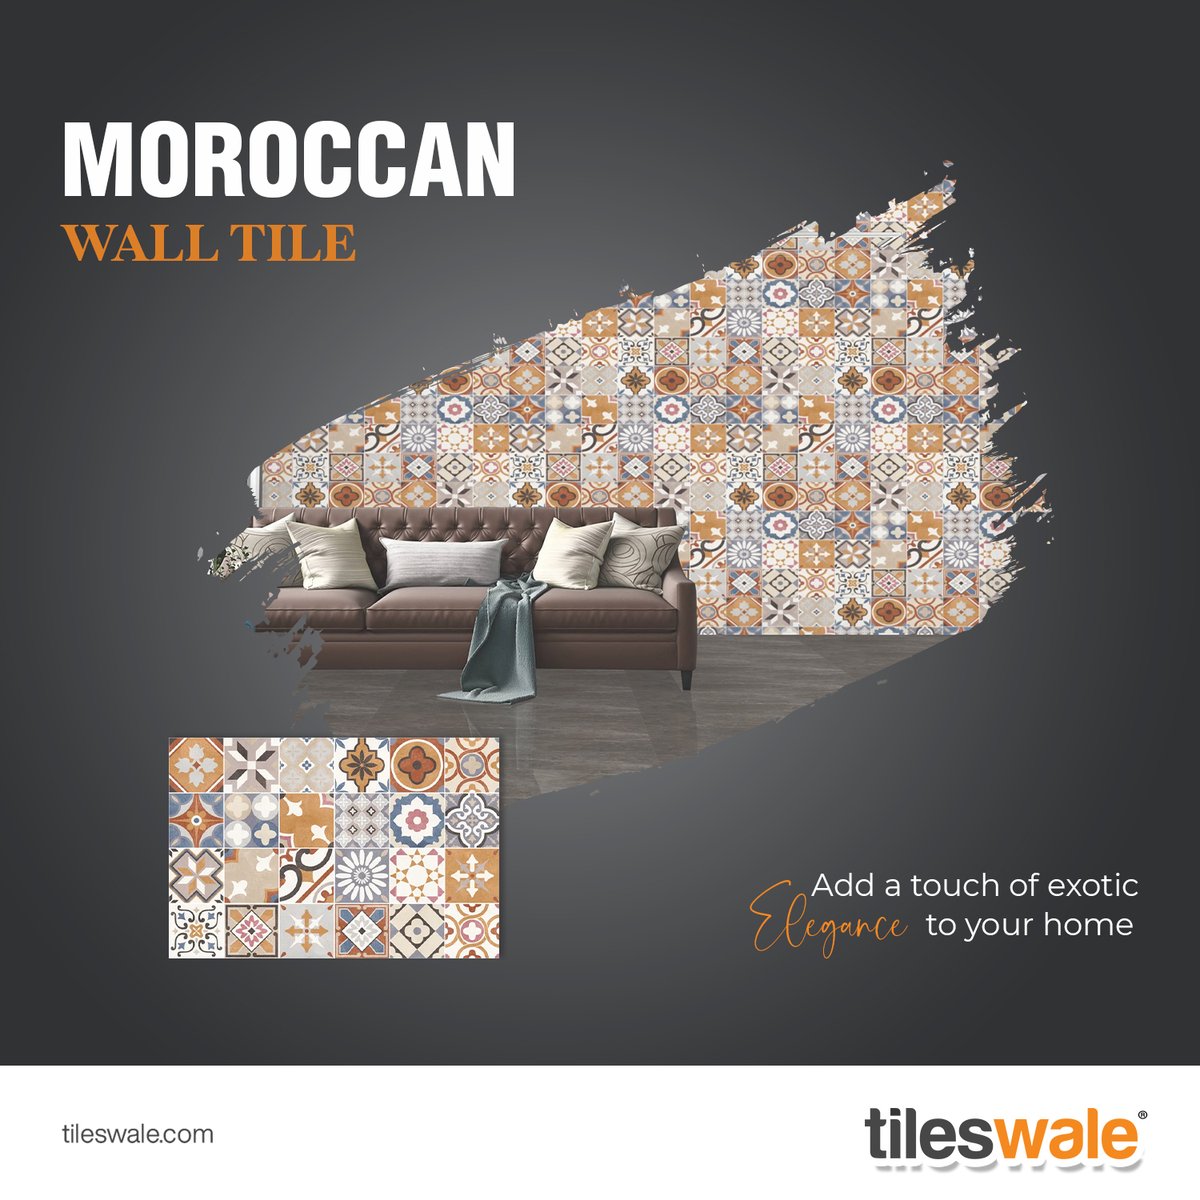 A touch of Moroccan elegance can be yours! Moroccan tiles can be paired with any style for your home. 

Size :- 𝟏𝟐𝟎𝟎𝐗𝟏𝟐𝟎𝟎 mm
Call us today:- 𝟗𝟒𝟎𝟗𝟗 𝟓𝟎𝟎𝟐𝟕

#tile #tiles #moroccanstyle #moroccan #ceramictile #walldecor #walltiles #walltilesdesign #morbi #tileswale